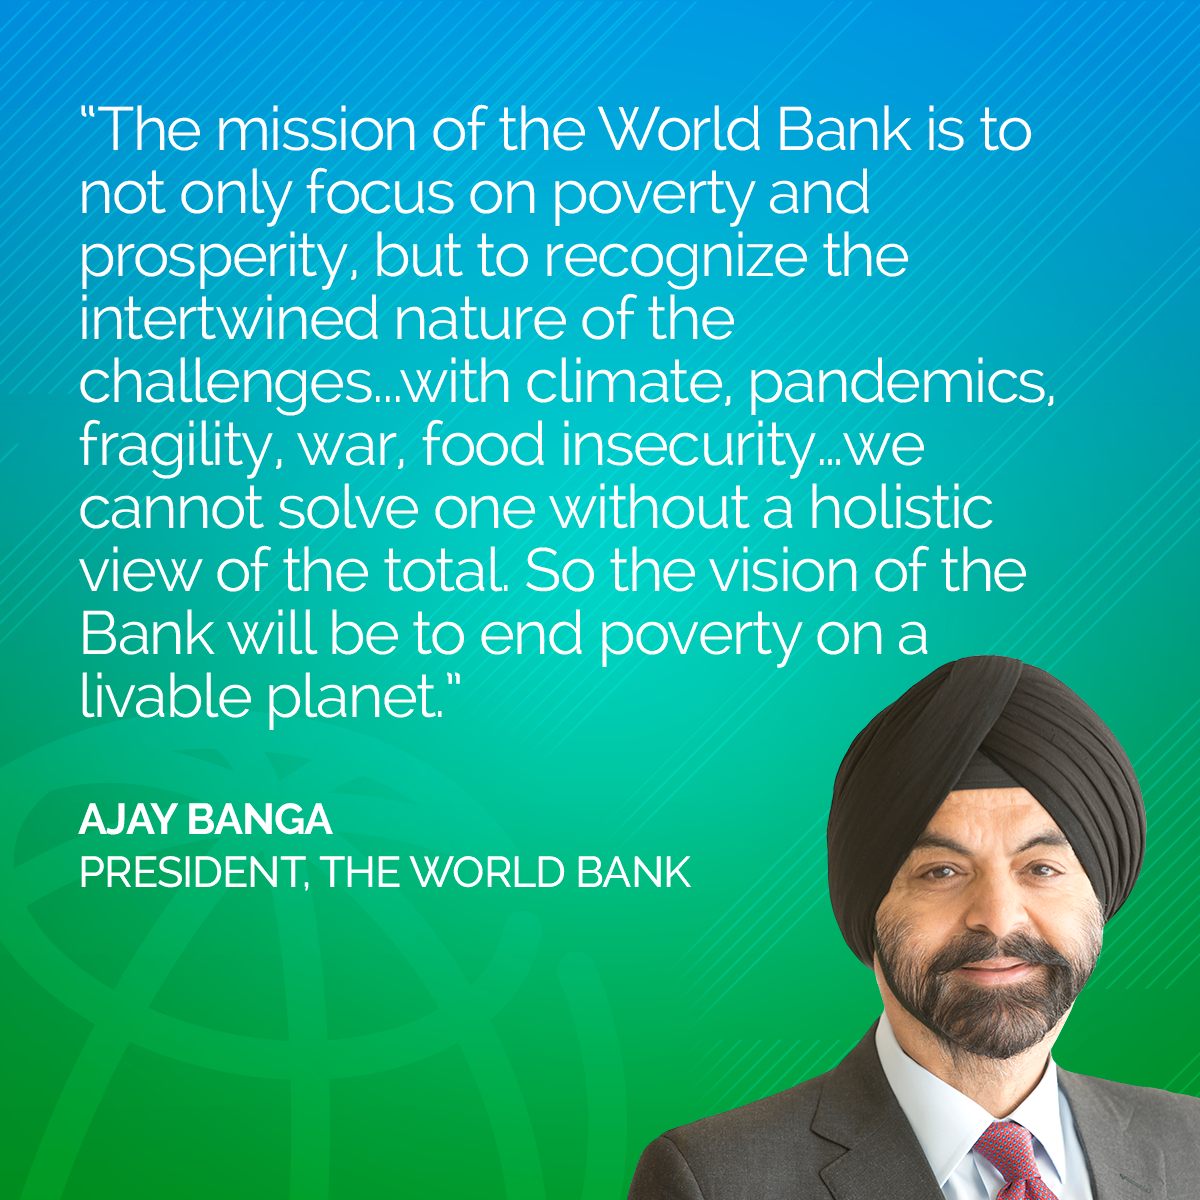 The mission of the World Bank described by Ajay Banga